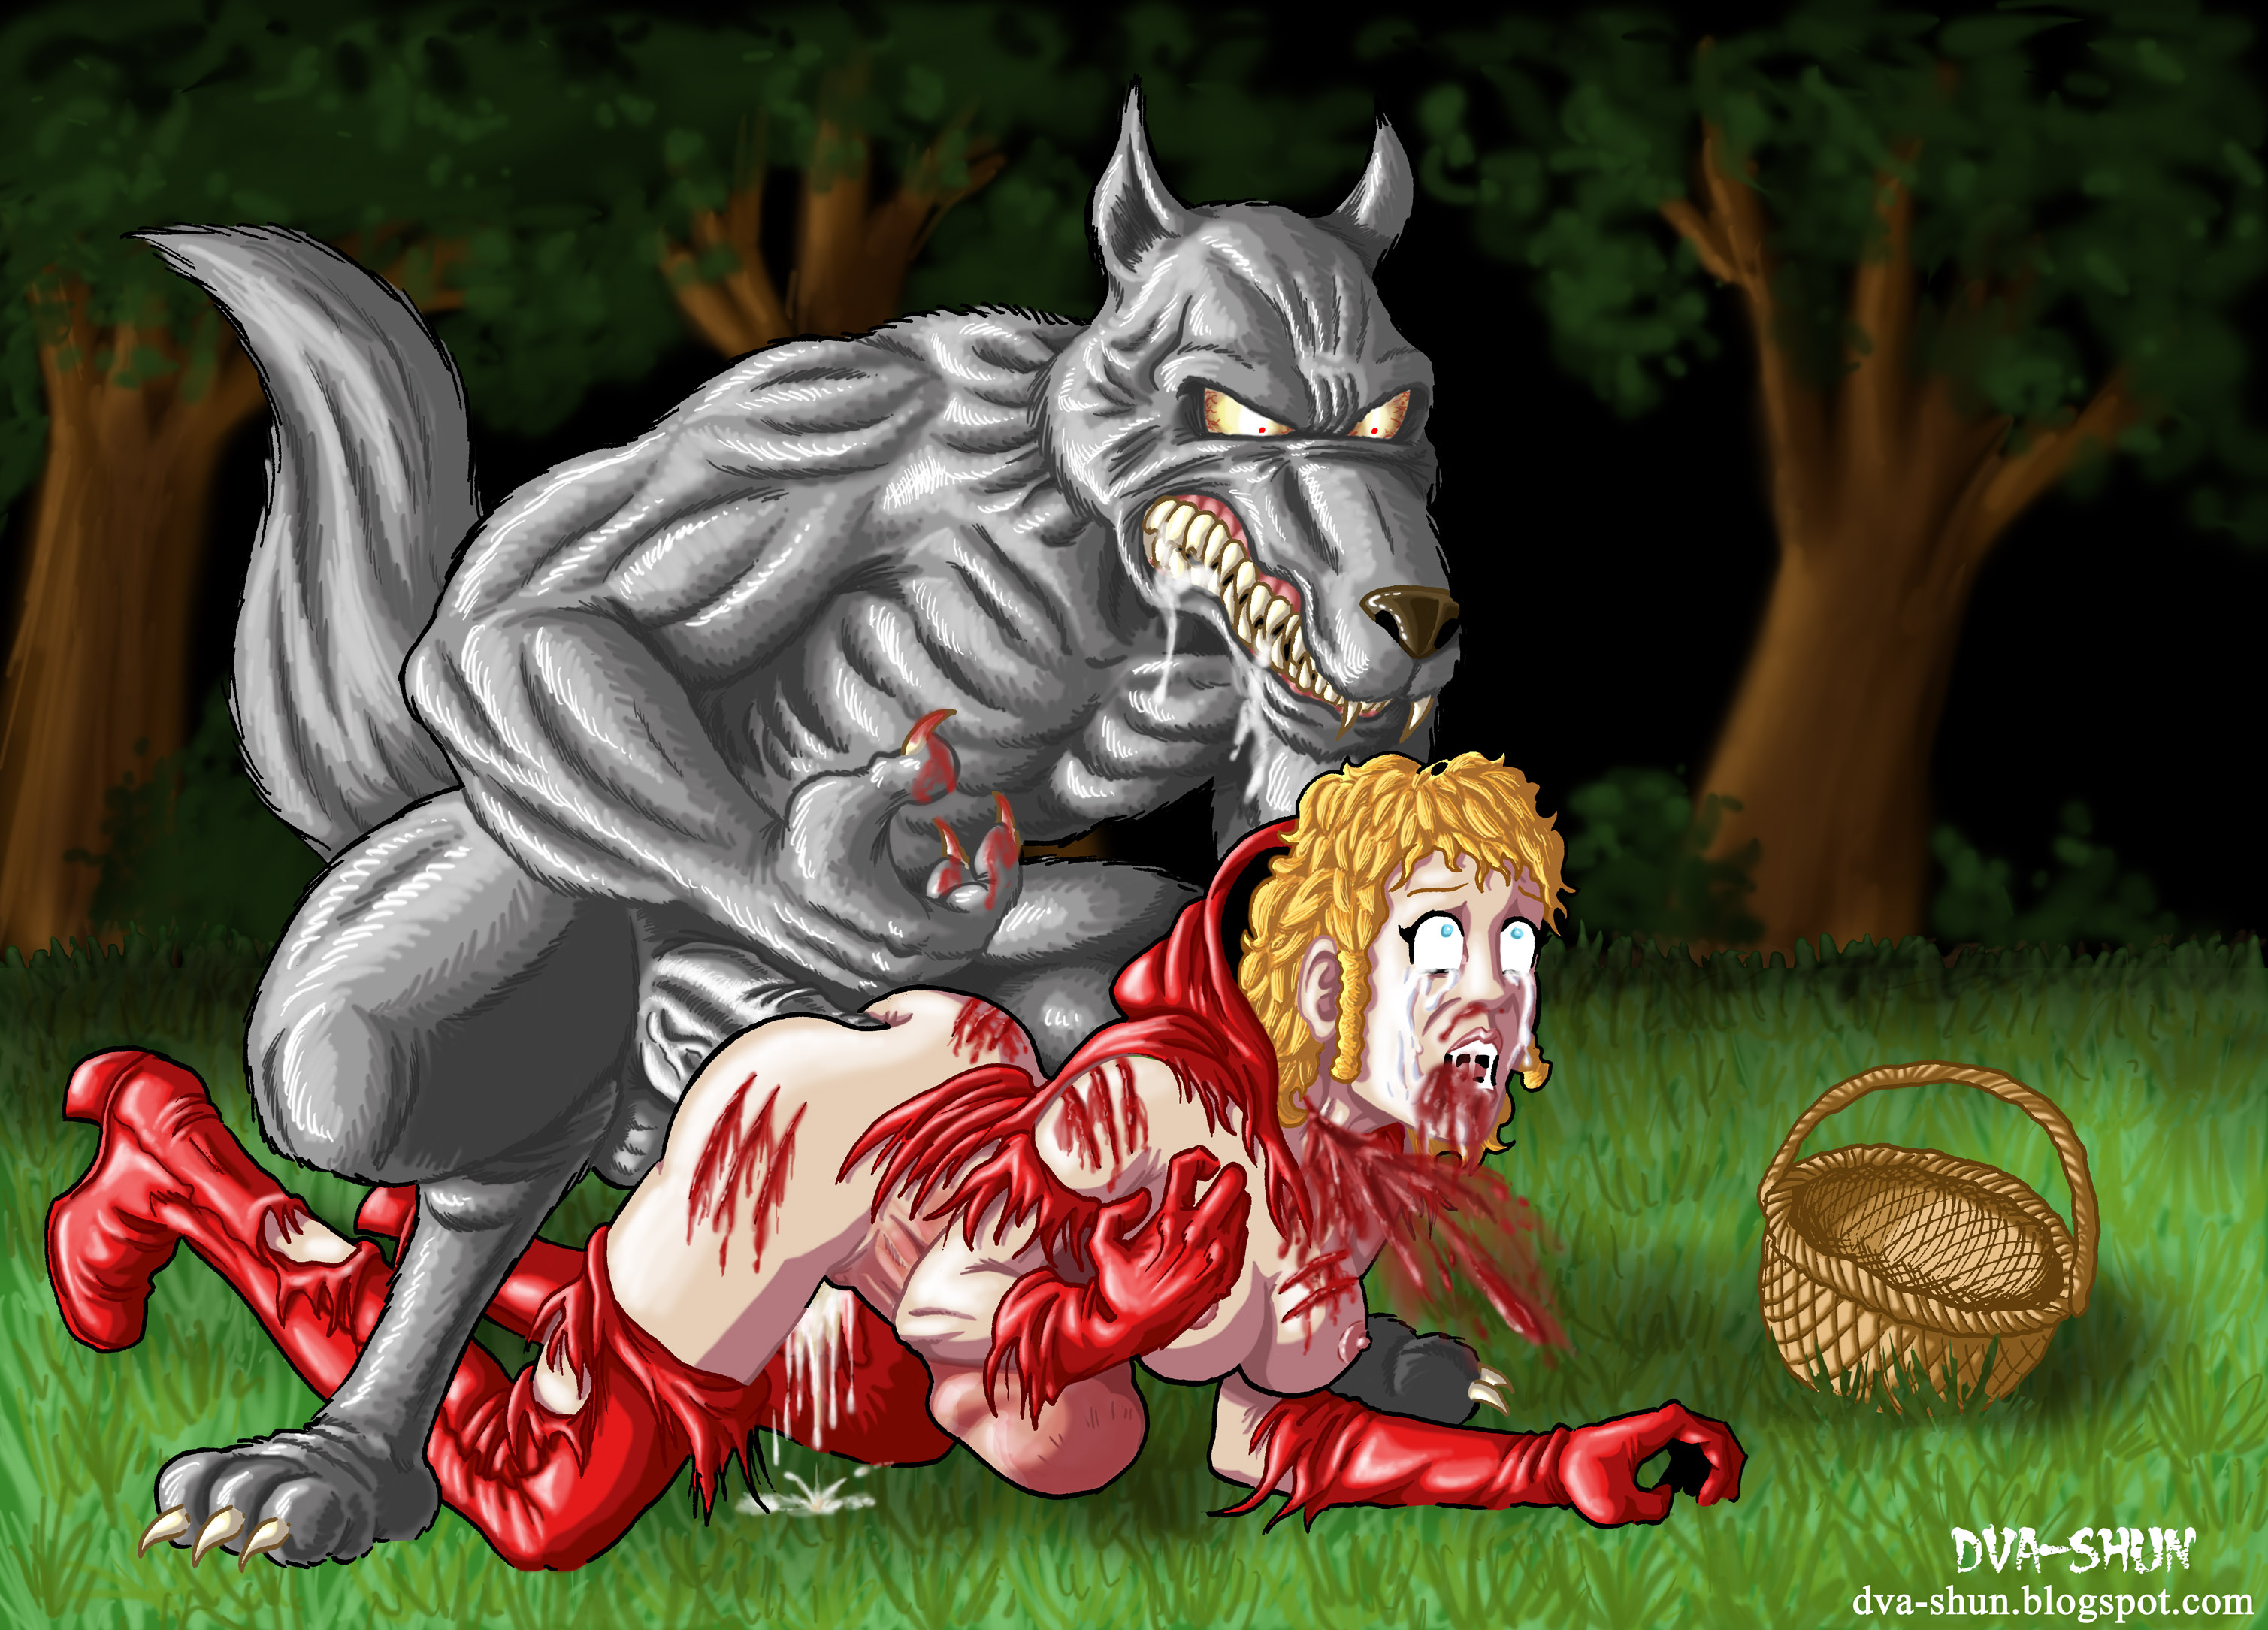 Little red riding hood fucks big bad wolf in spooky cabin halloween special...